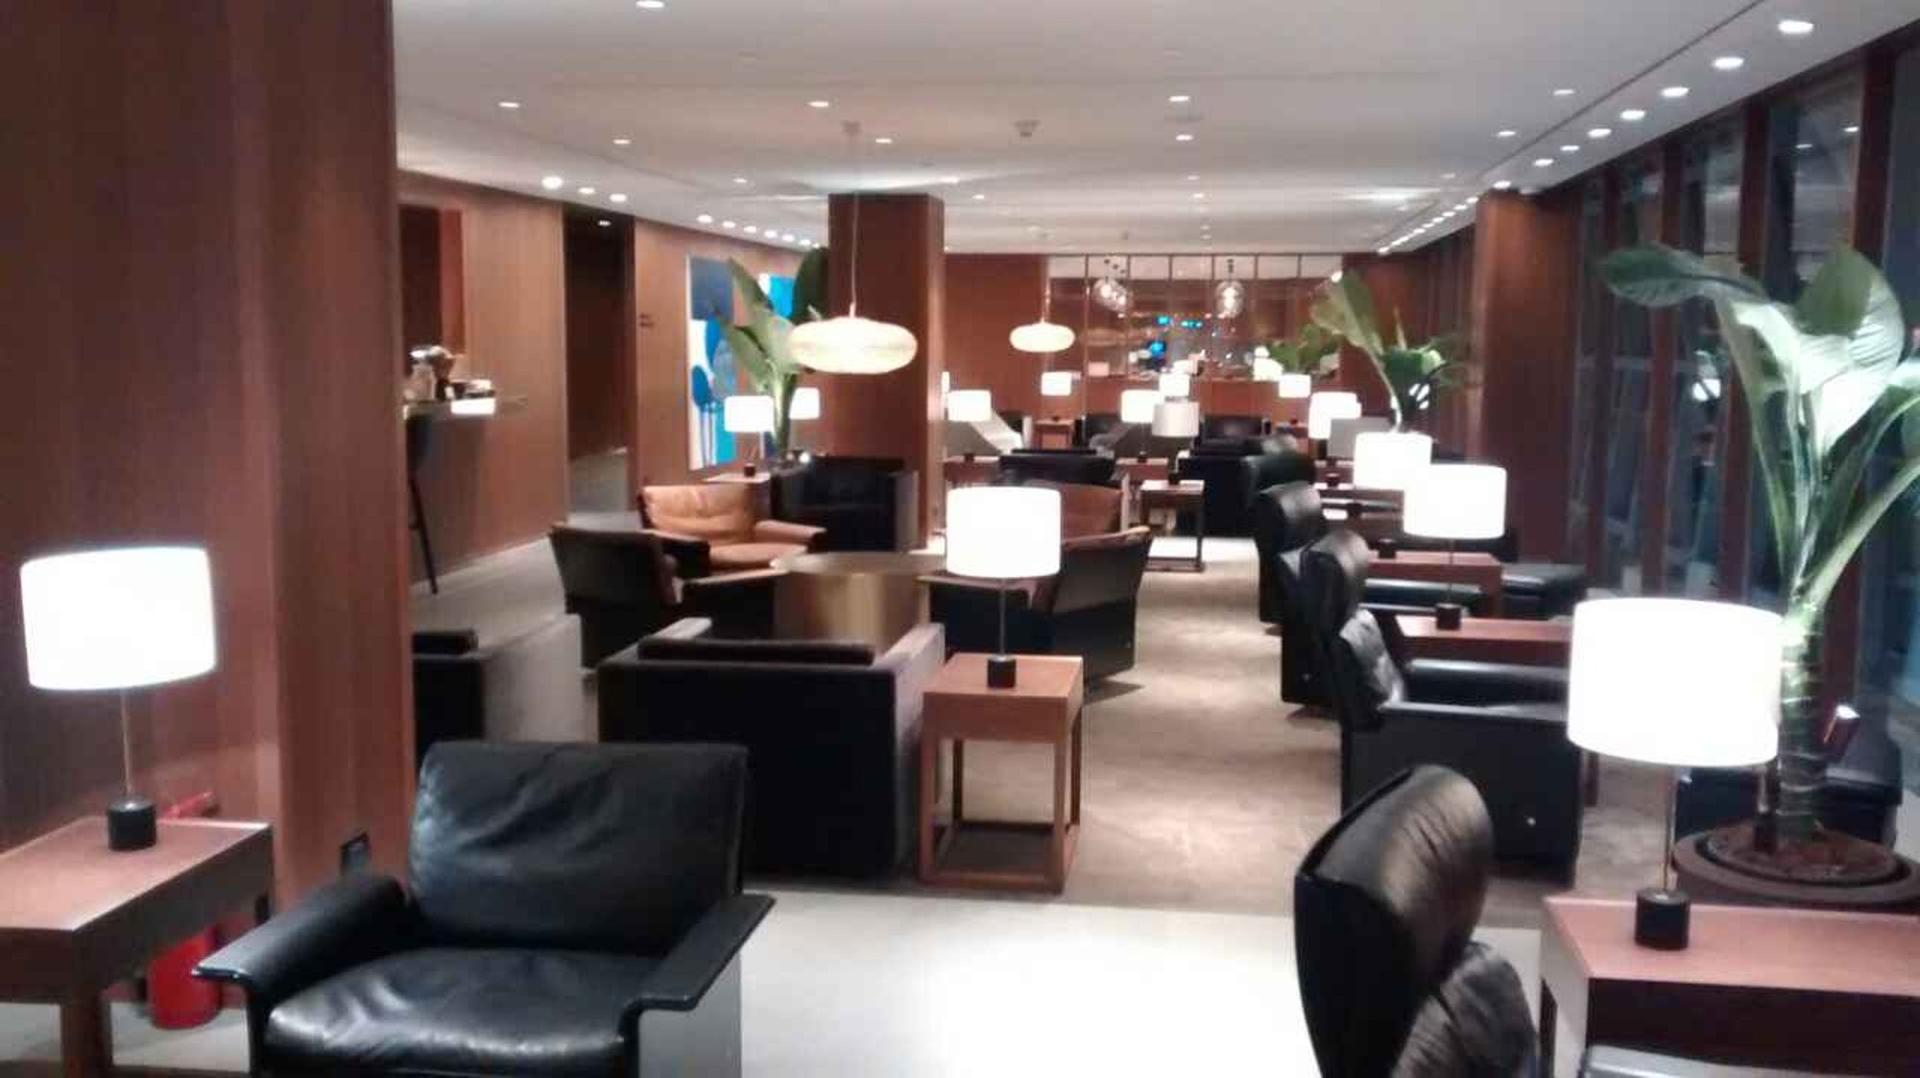 Cathay Pacific First and Business Class Lounge image 13 of 69